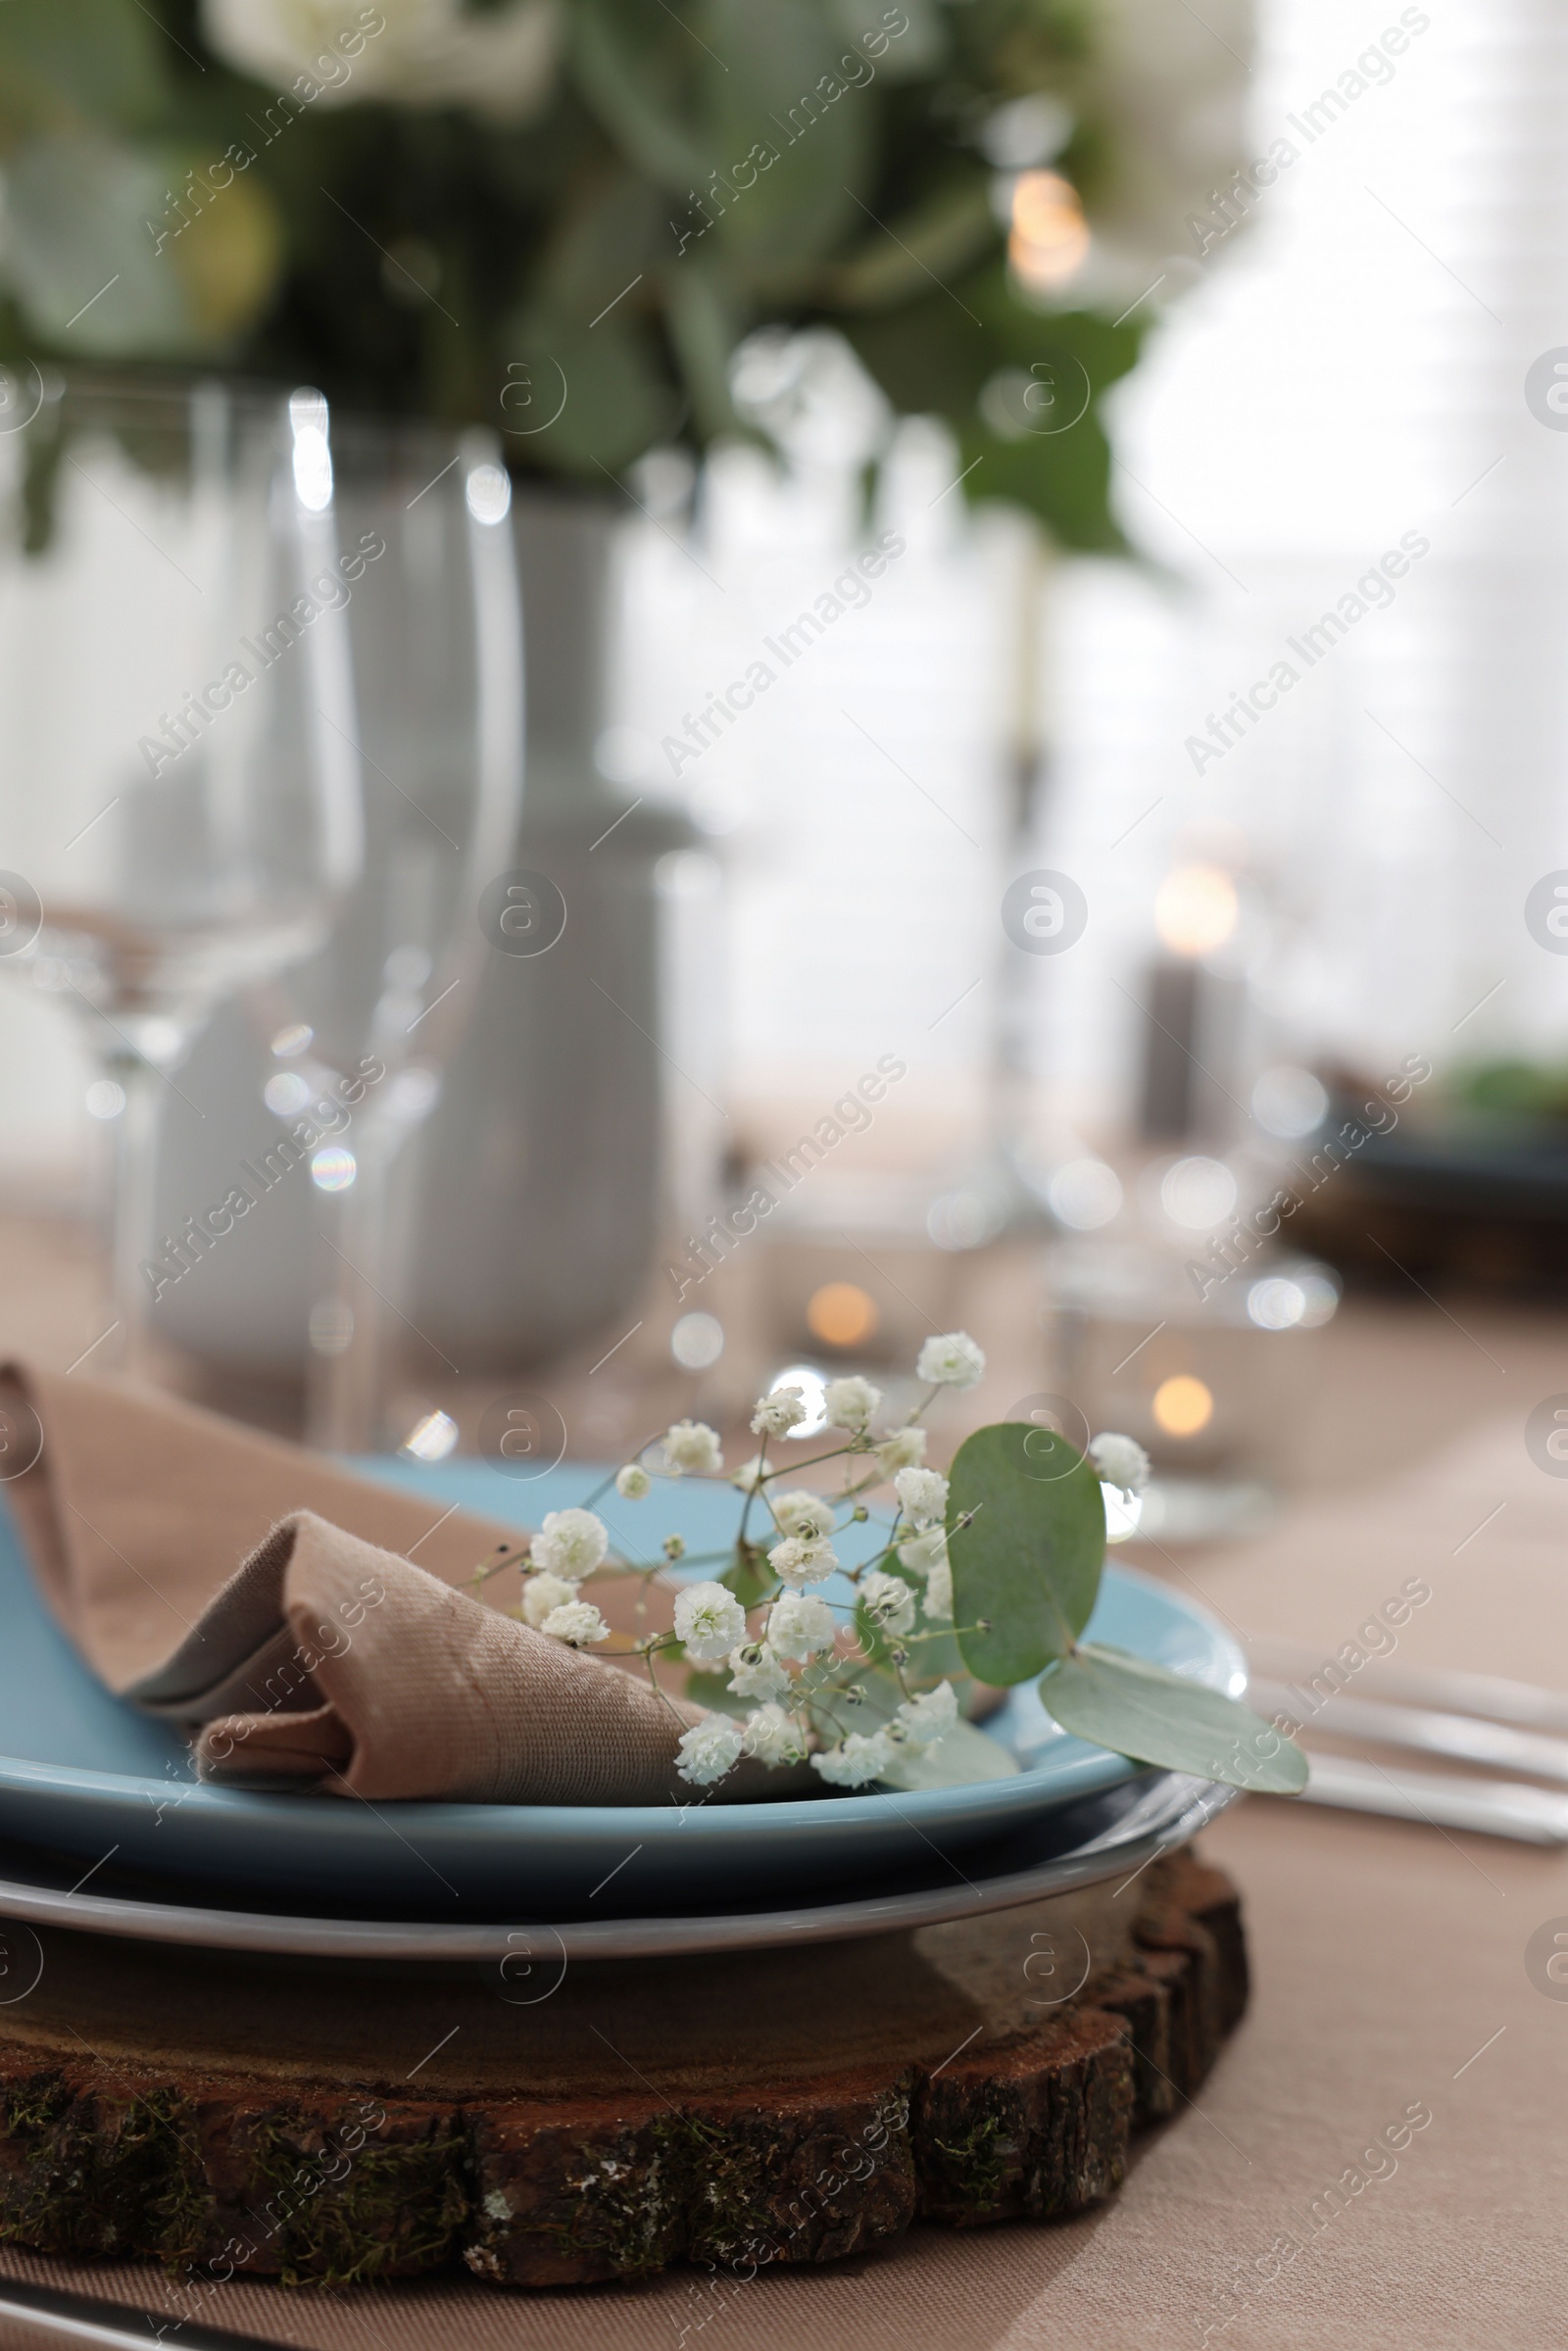 Photo of Festive table setting with beautiful tableware and decor, closeup